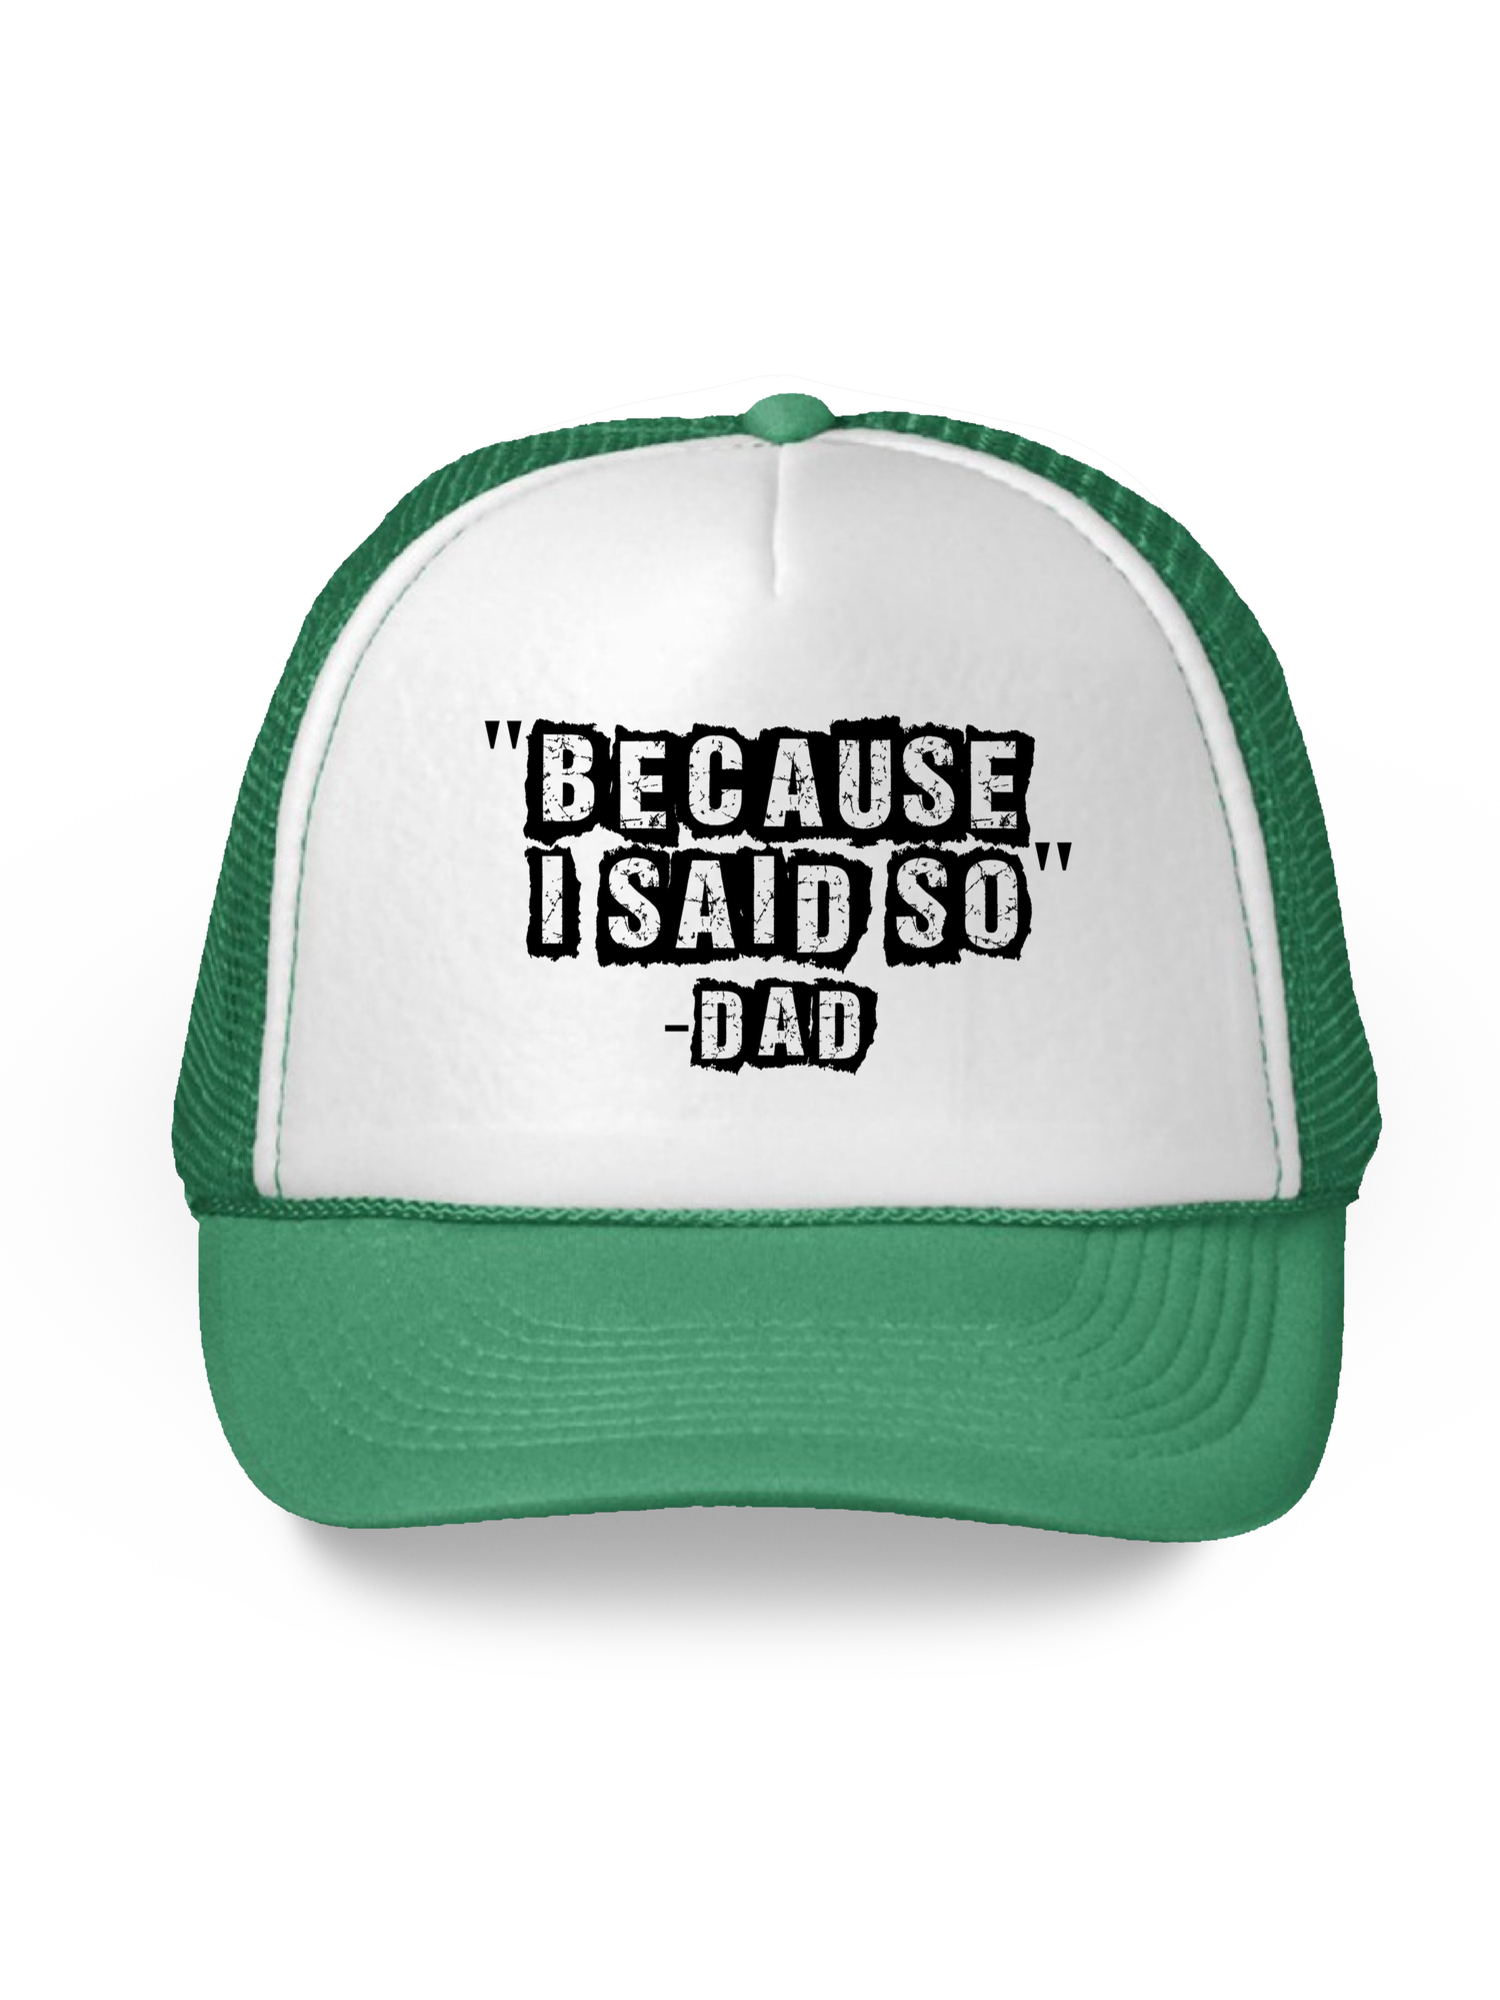 Awkward Styles Because I Said So Dad Hat Boss Dad Trucker Hat Legendary Dad Hat Funny Gifts for Father's Day Hat Accessories for Dad Father Trucker Hat Father's Day 2018 Father Son Father Daughter - image 1 of 6